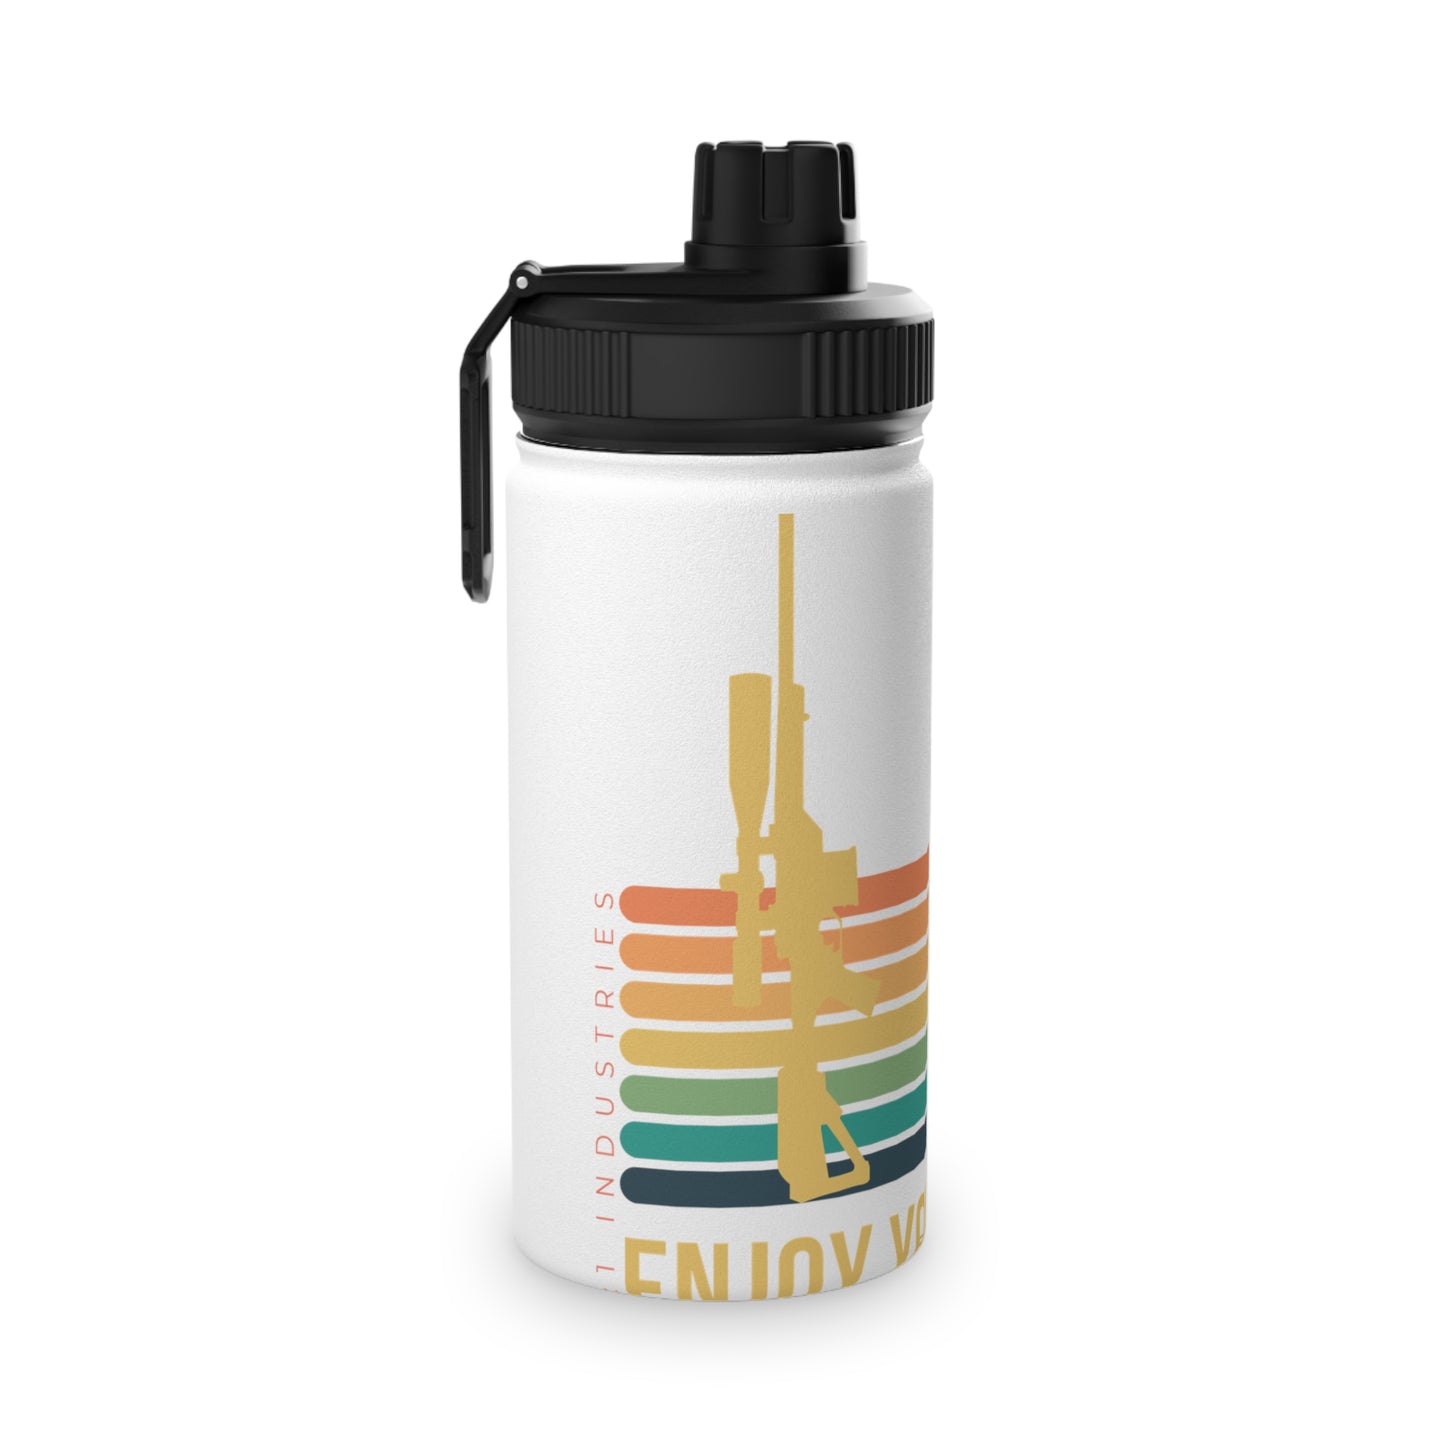 Enjoy Your Summer - Stainless Steel Water Bottle, Sports Lid